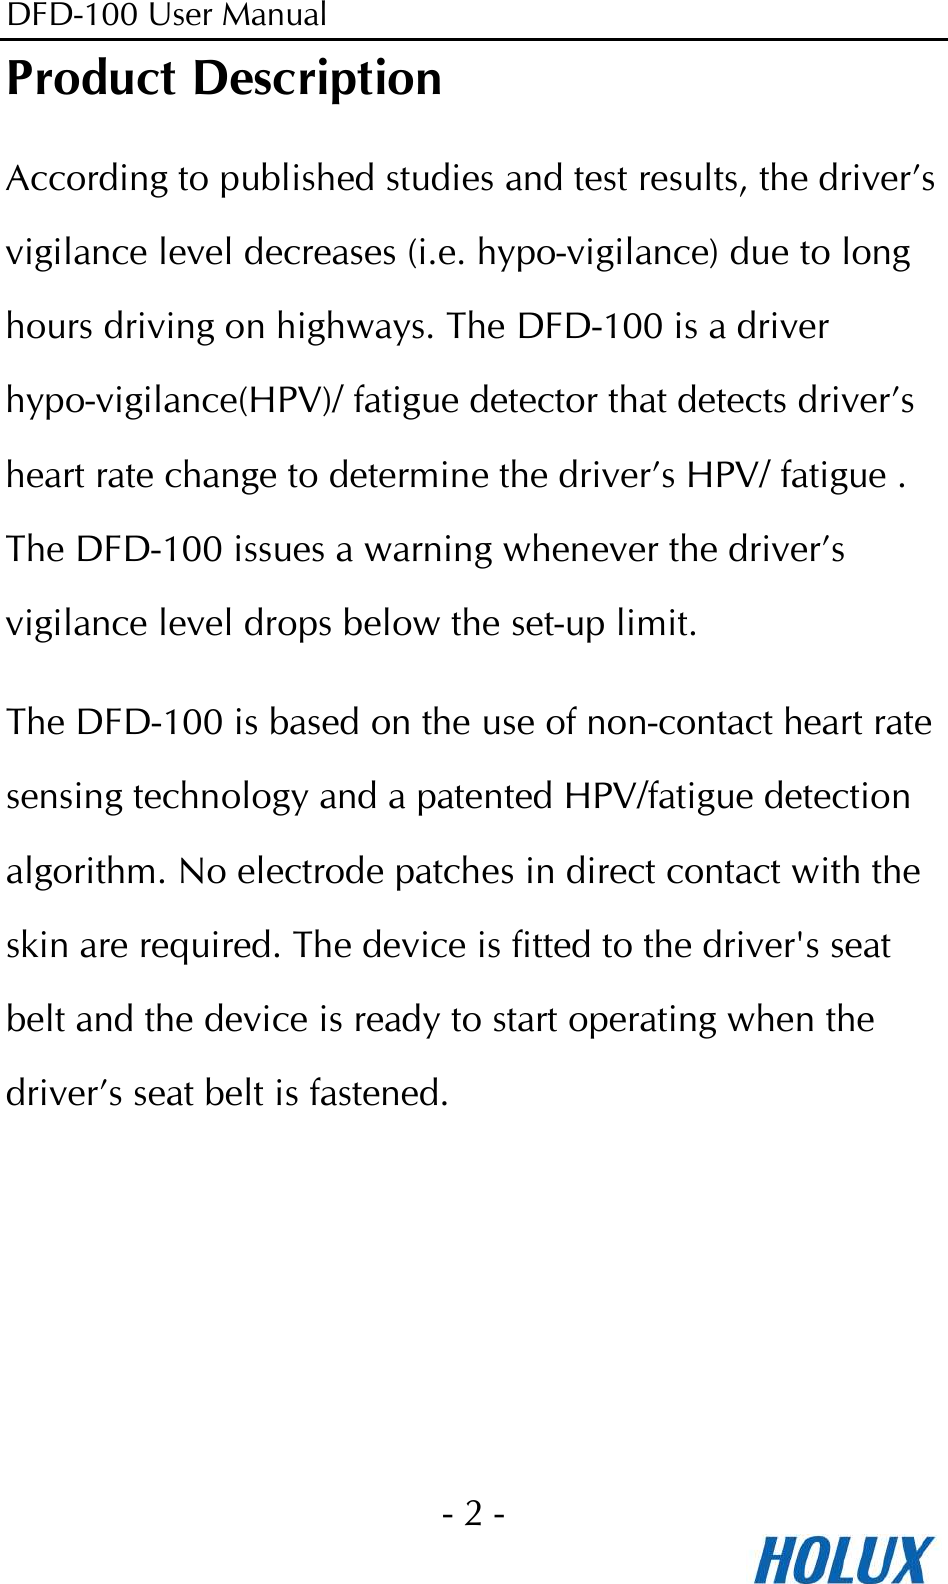 DFD-100 User Manual - 2 -  Product Description According to published studies and test results, the driver’s vigilance level decreases (i.e. hypo-vigilance) due to long hours driving on highways. The DFD-100 is a driver hypo-vigilance(HPV)/ fatigue detector that detects driver’s heart rate change to determine the driver’s HPV/ fatigue . The DFD-100 issues a warning whenever the driver’s vigilance level drops below the set-up limit.   The DFD-100 is based on the use of non-contact heart rate sensing technology and a patented HPV/fatigue detection algorithm. No electrode patches in direct contact with the skin are required. The device is fitted to the driver&apos;s seat belt and the device is ready to start operating when the driver’s seat belt is fastened.  